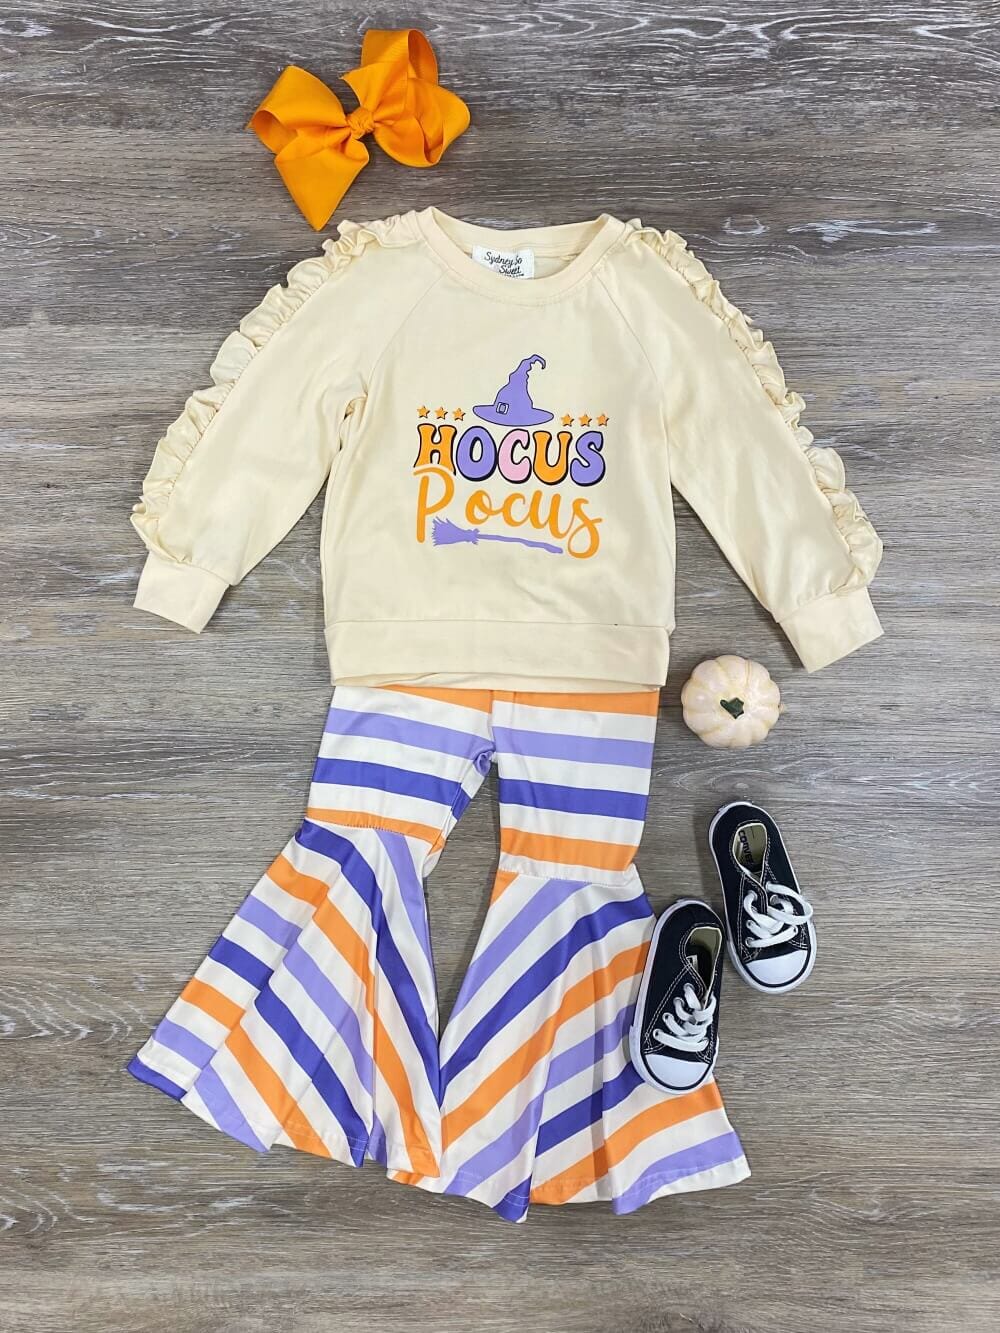 Bell Bottom Outfits For Little Girls & Toddlers, Ships Fast